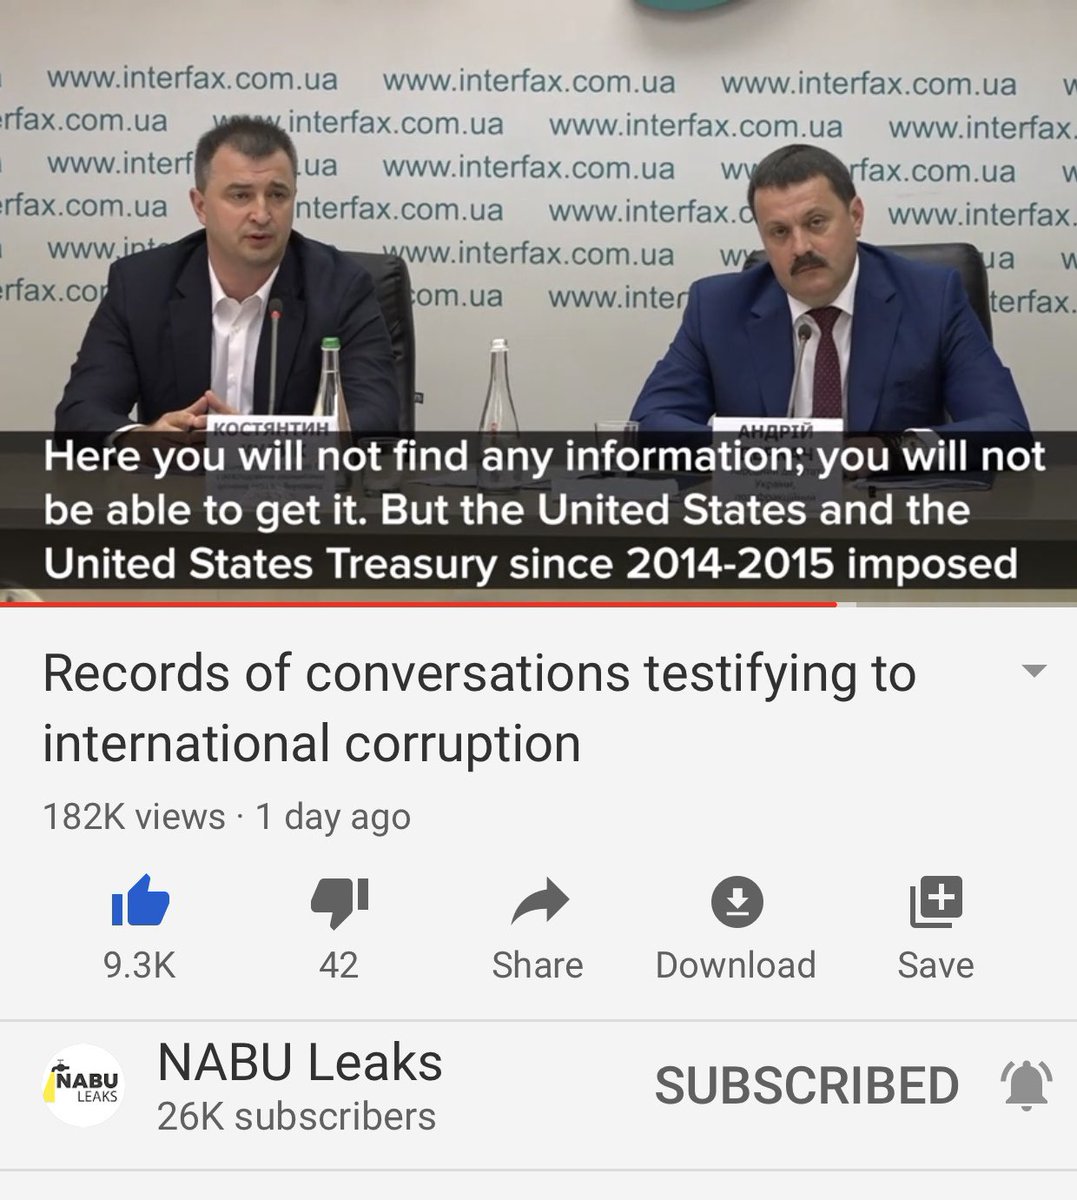 The other investigator steps in and says look, all Burisma investigations have been stopped. Says you won’t find any info from Ukraine because of the Biden bribes which sucks.